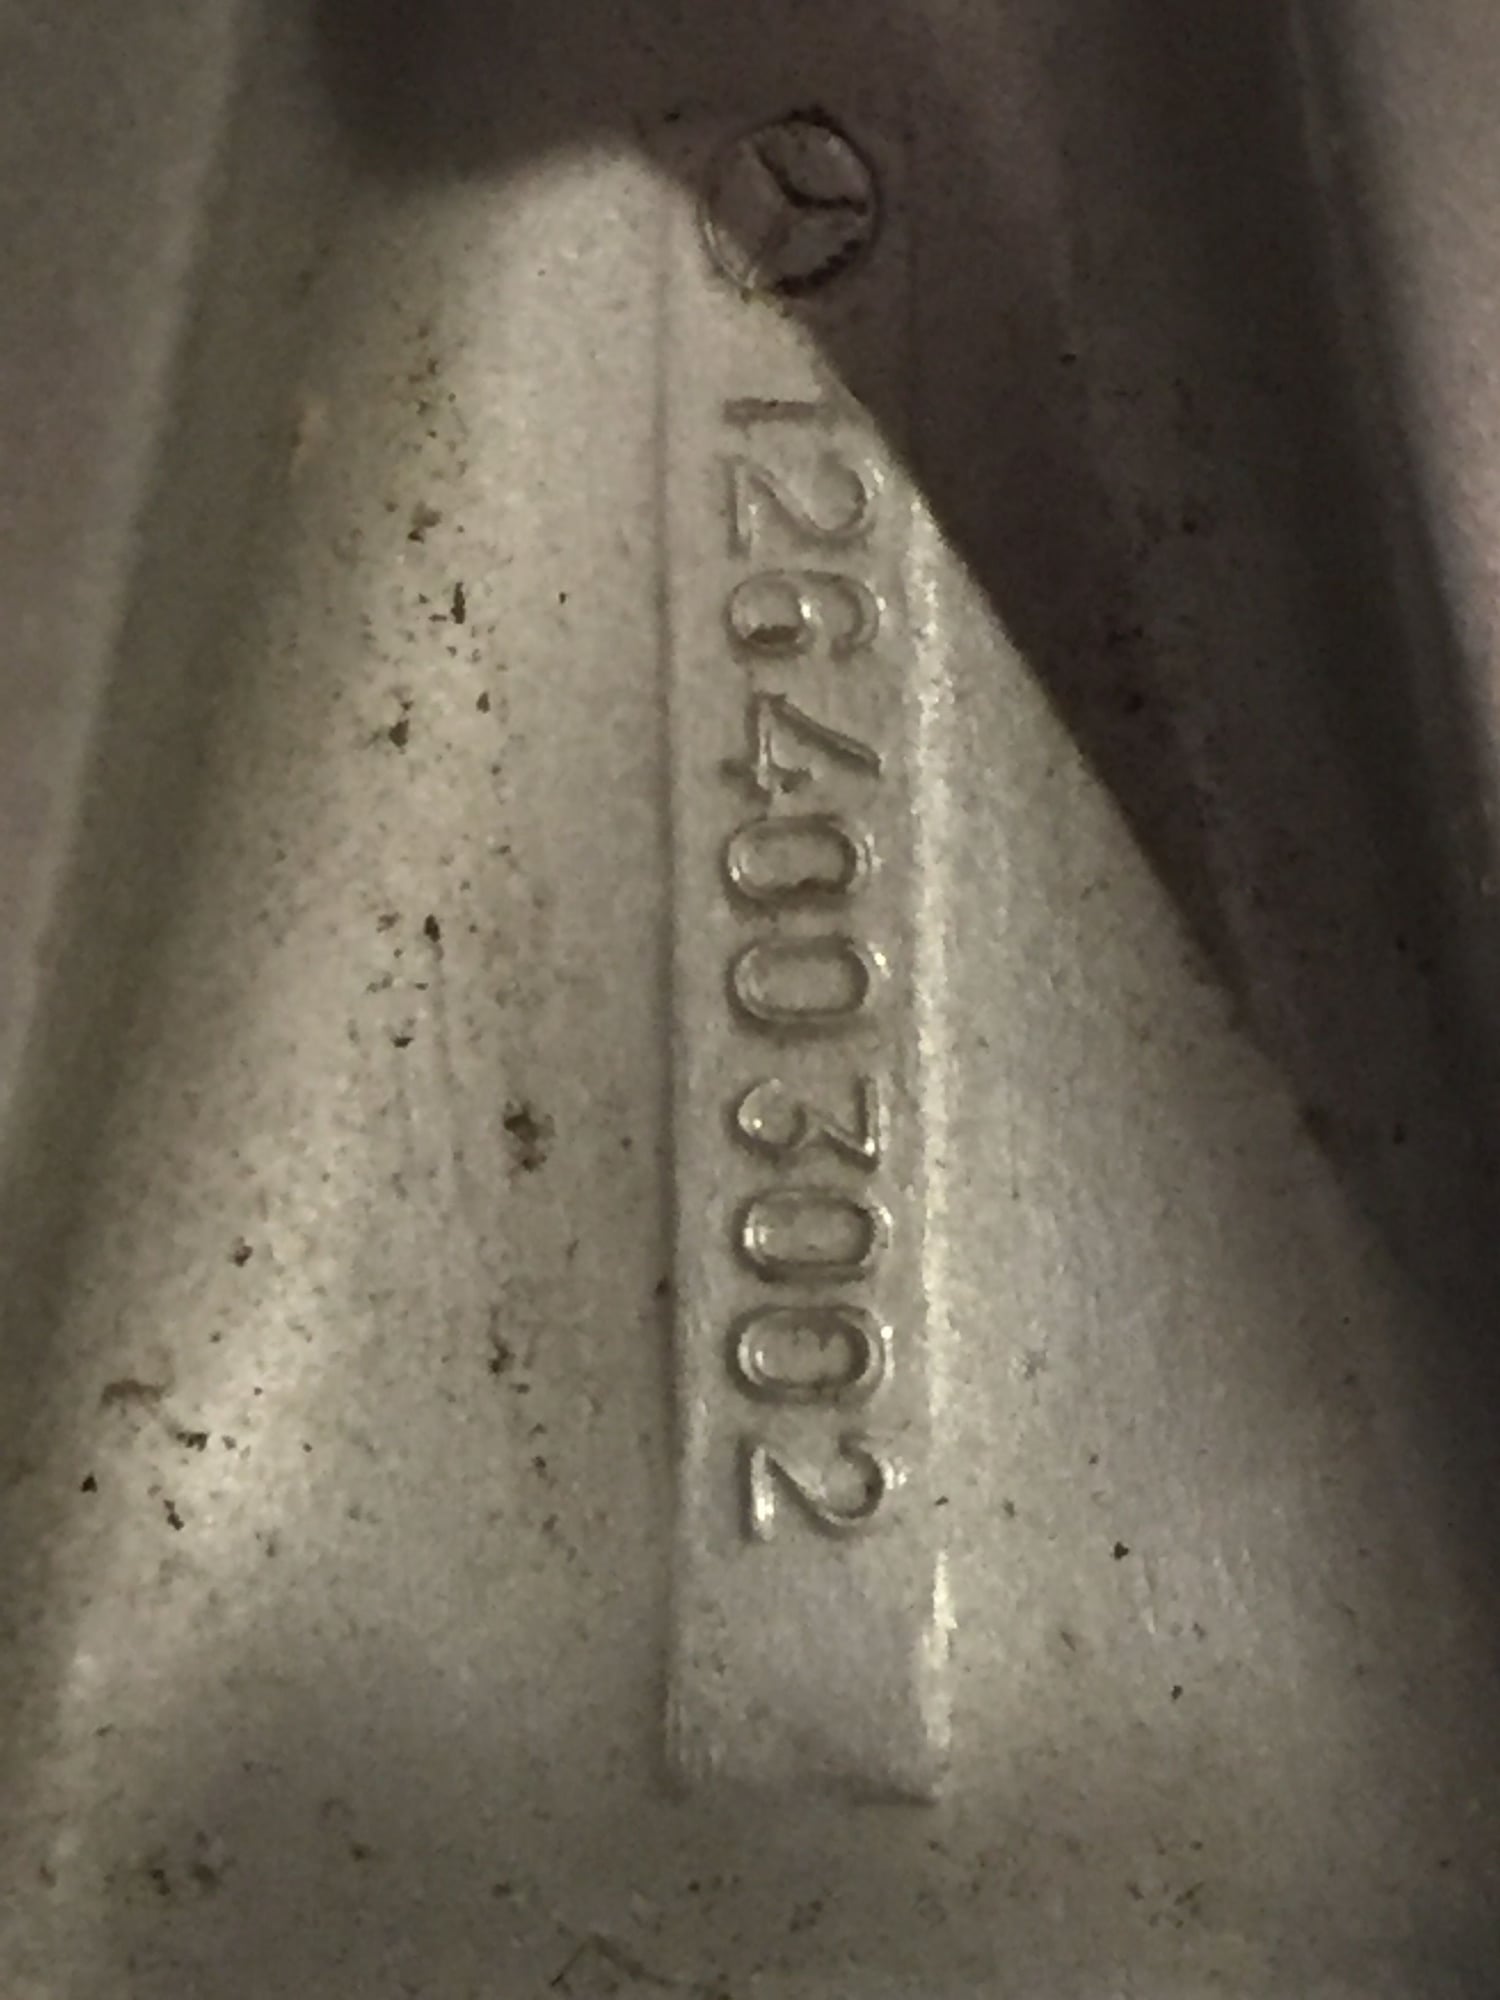 Wheels and Tires/Axles - 15 inch Alloy Rims (2) 1264003002 - Used - All Years Mercedes-Benz 560SEC - Buffalo Grove, IL 60089, United States